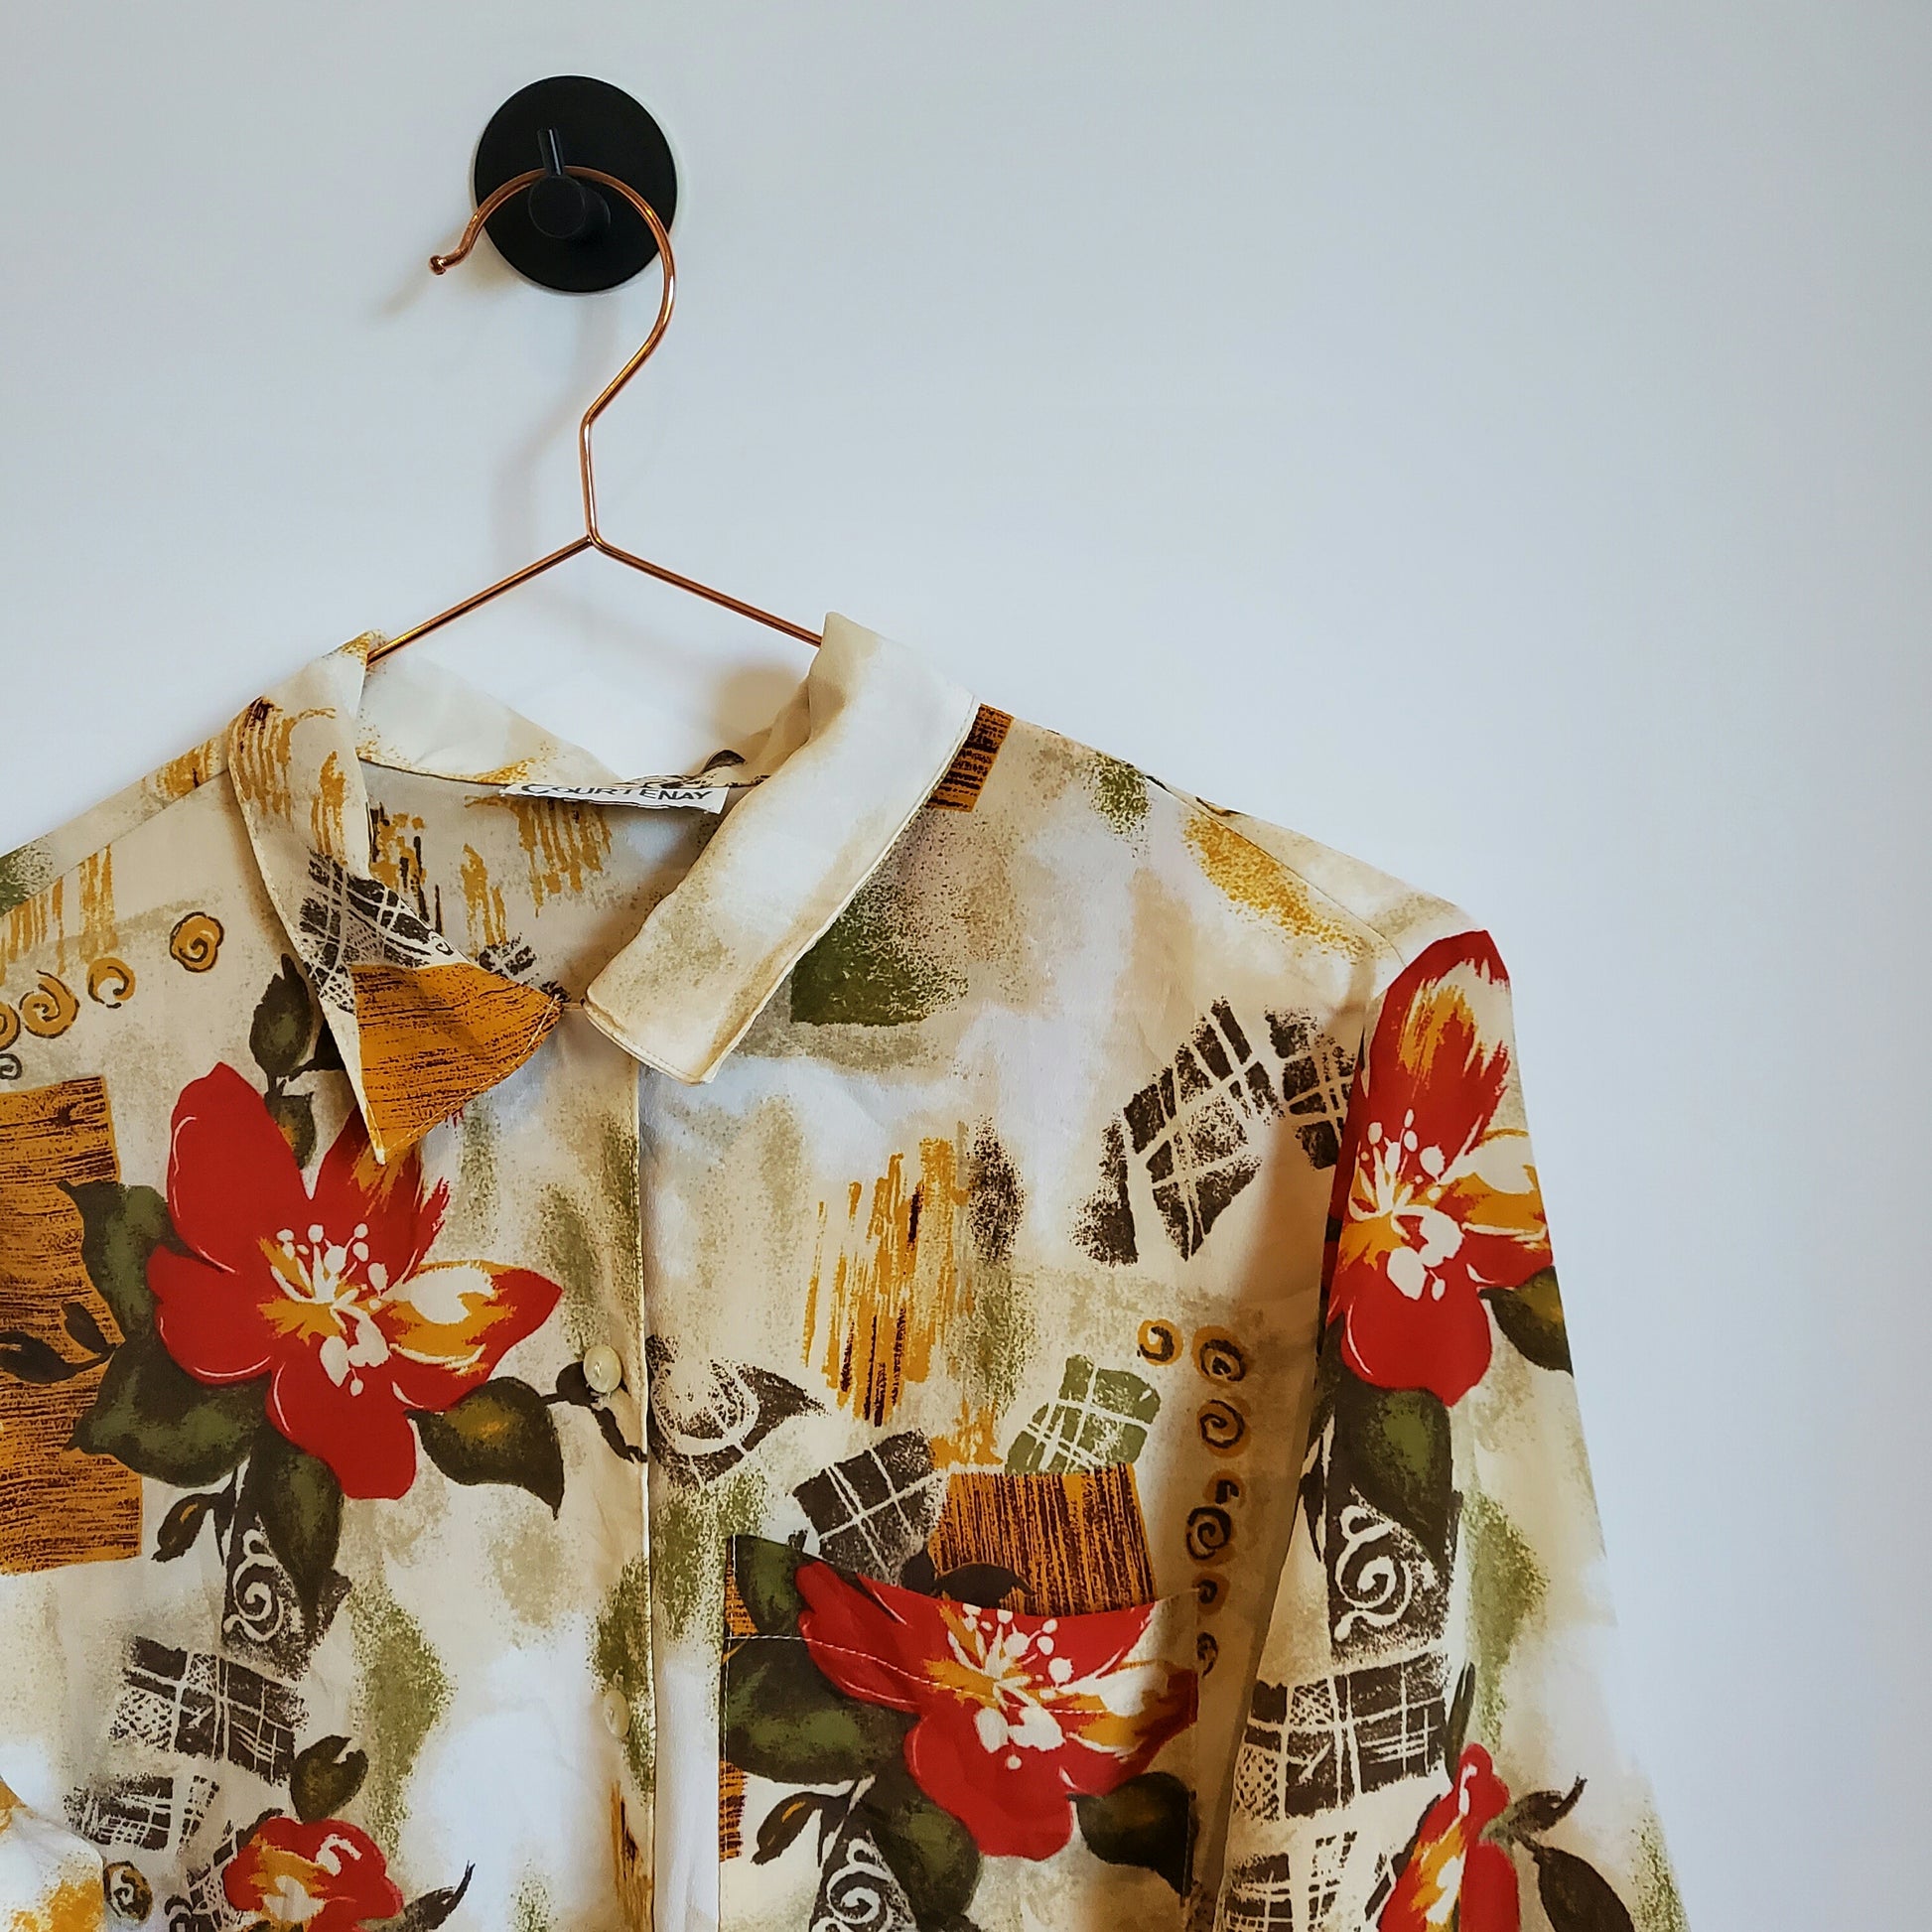 Vintage 90s Floral Blouse Beige and Red Size 8-10